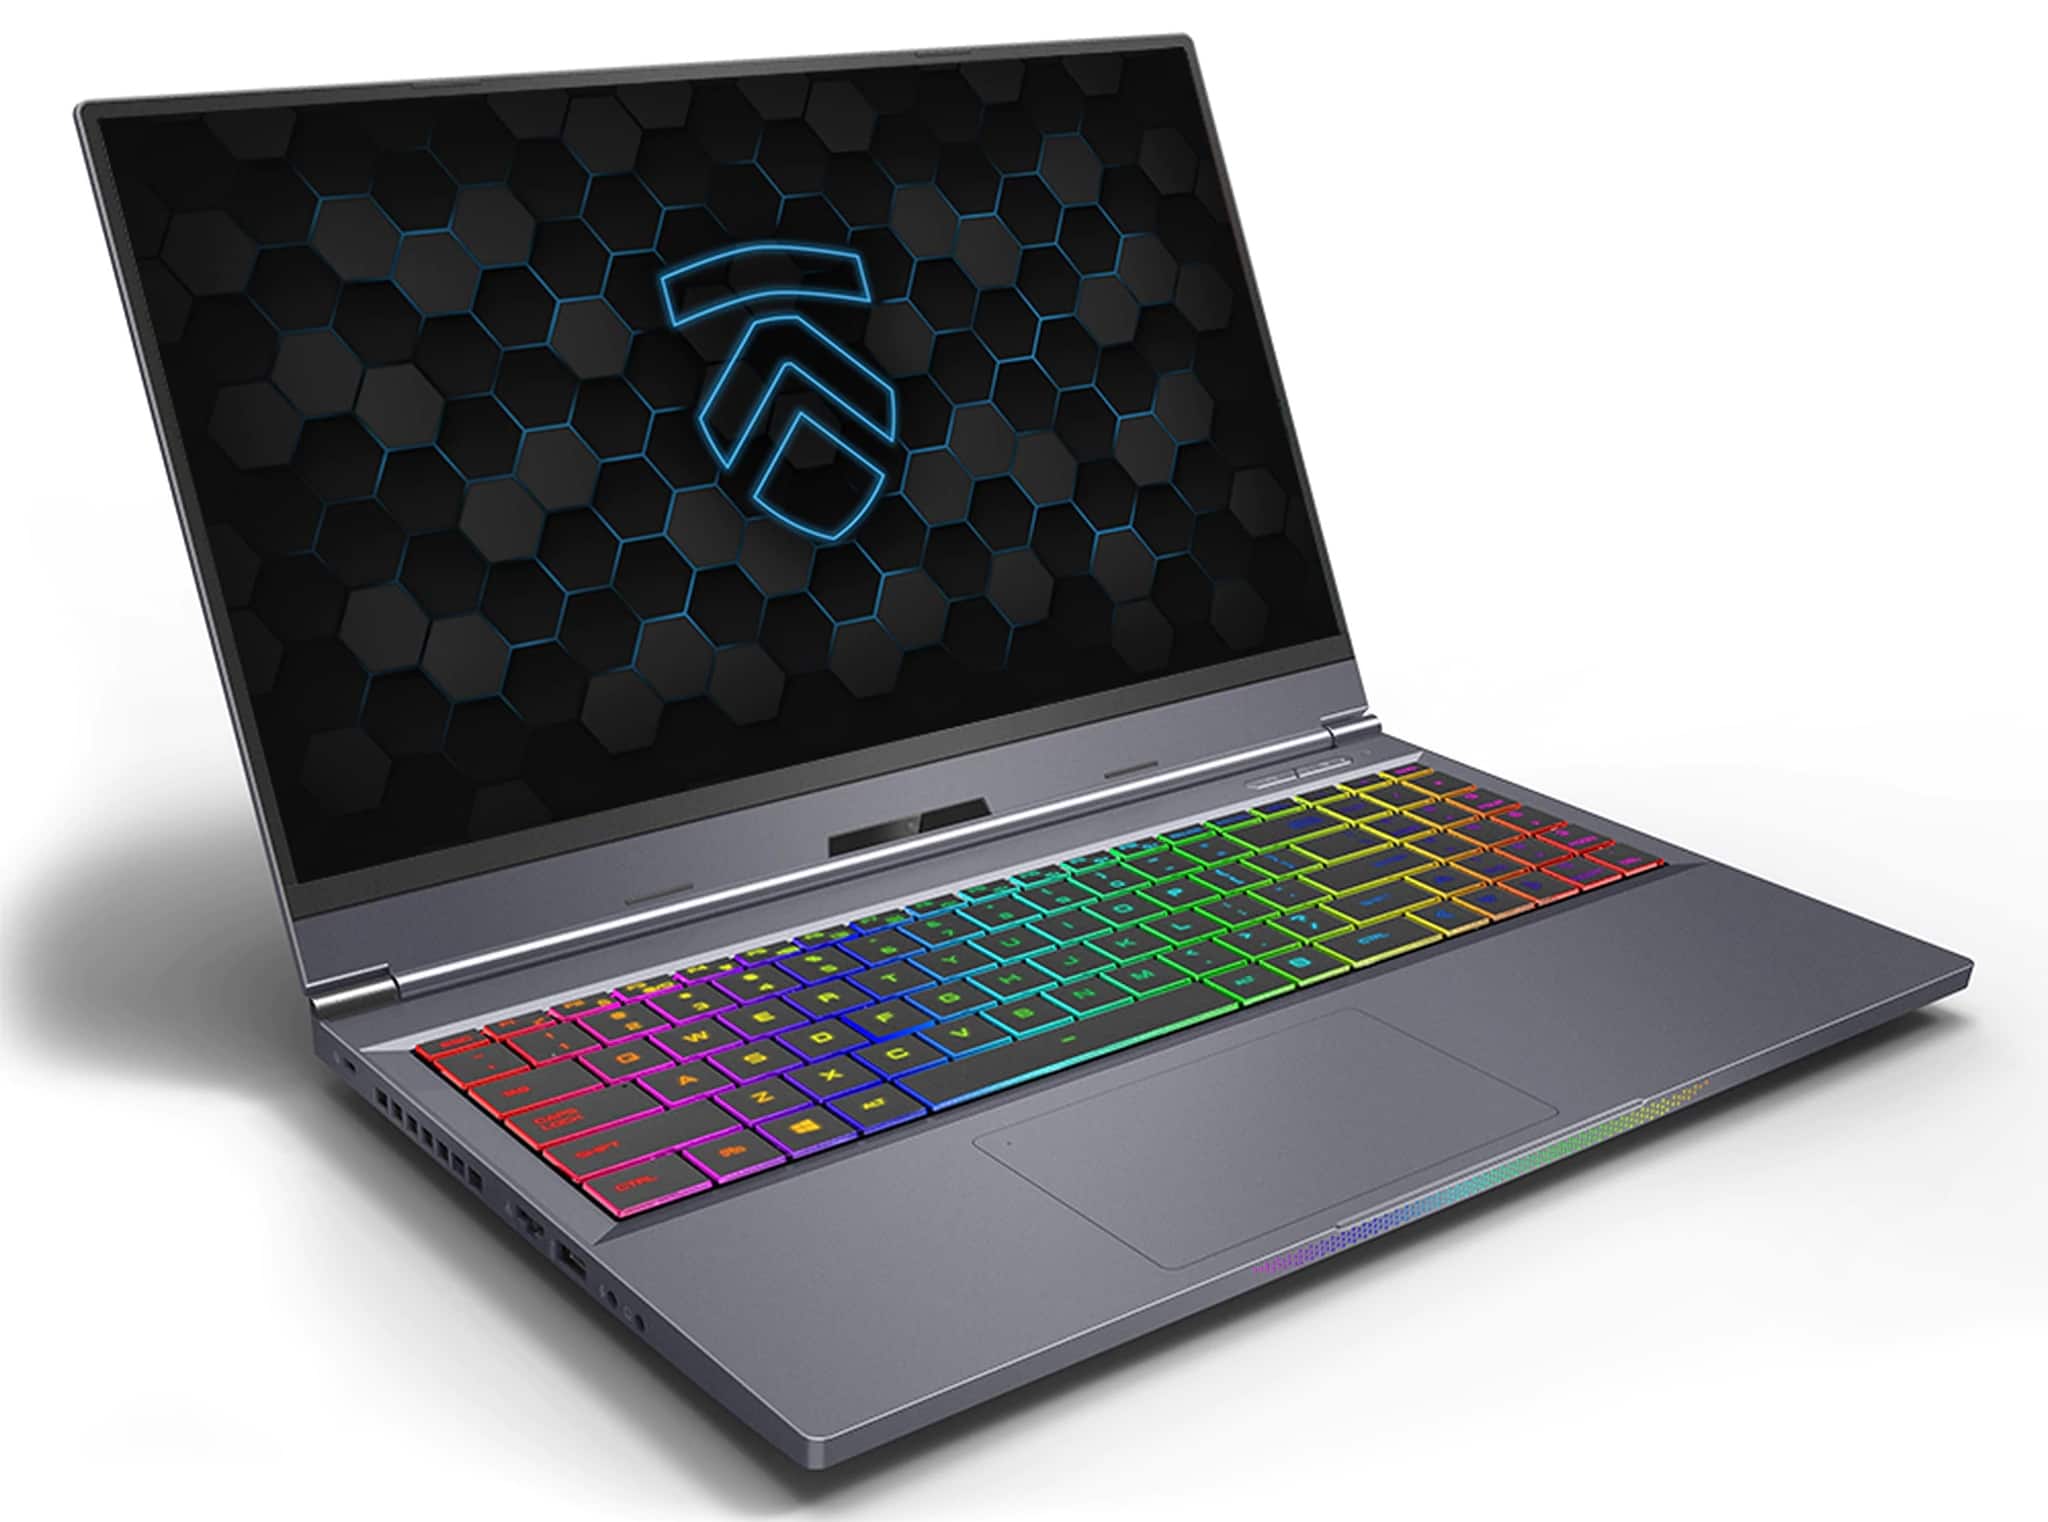 Eluktronics Launches World’s First Gaming Laptops With 1440p 165Hz Displays